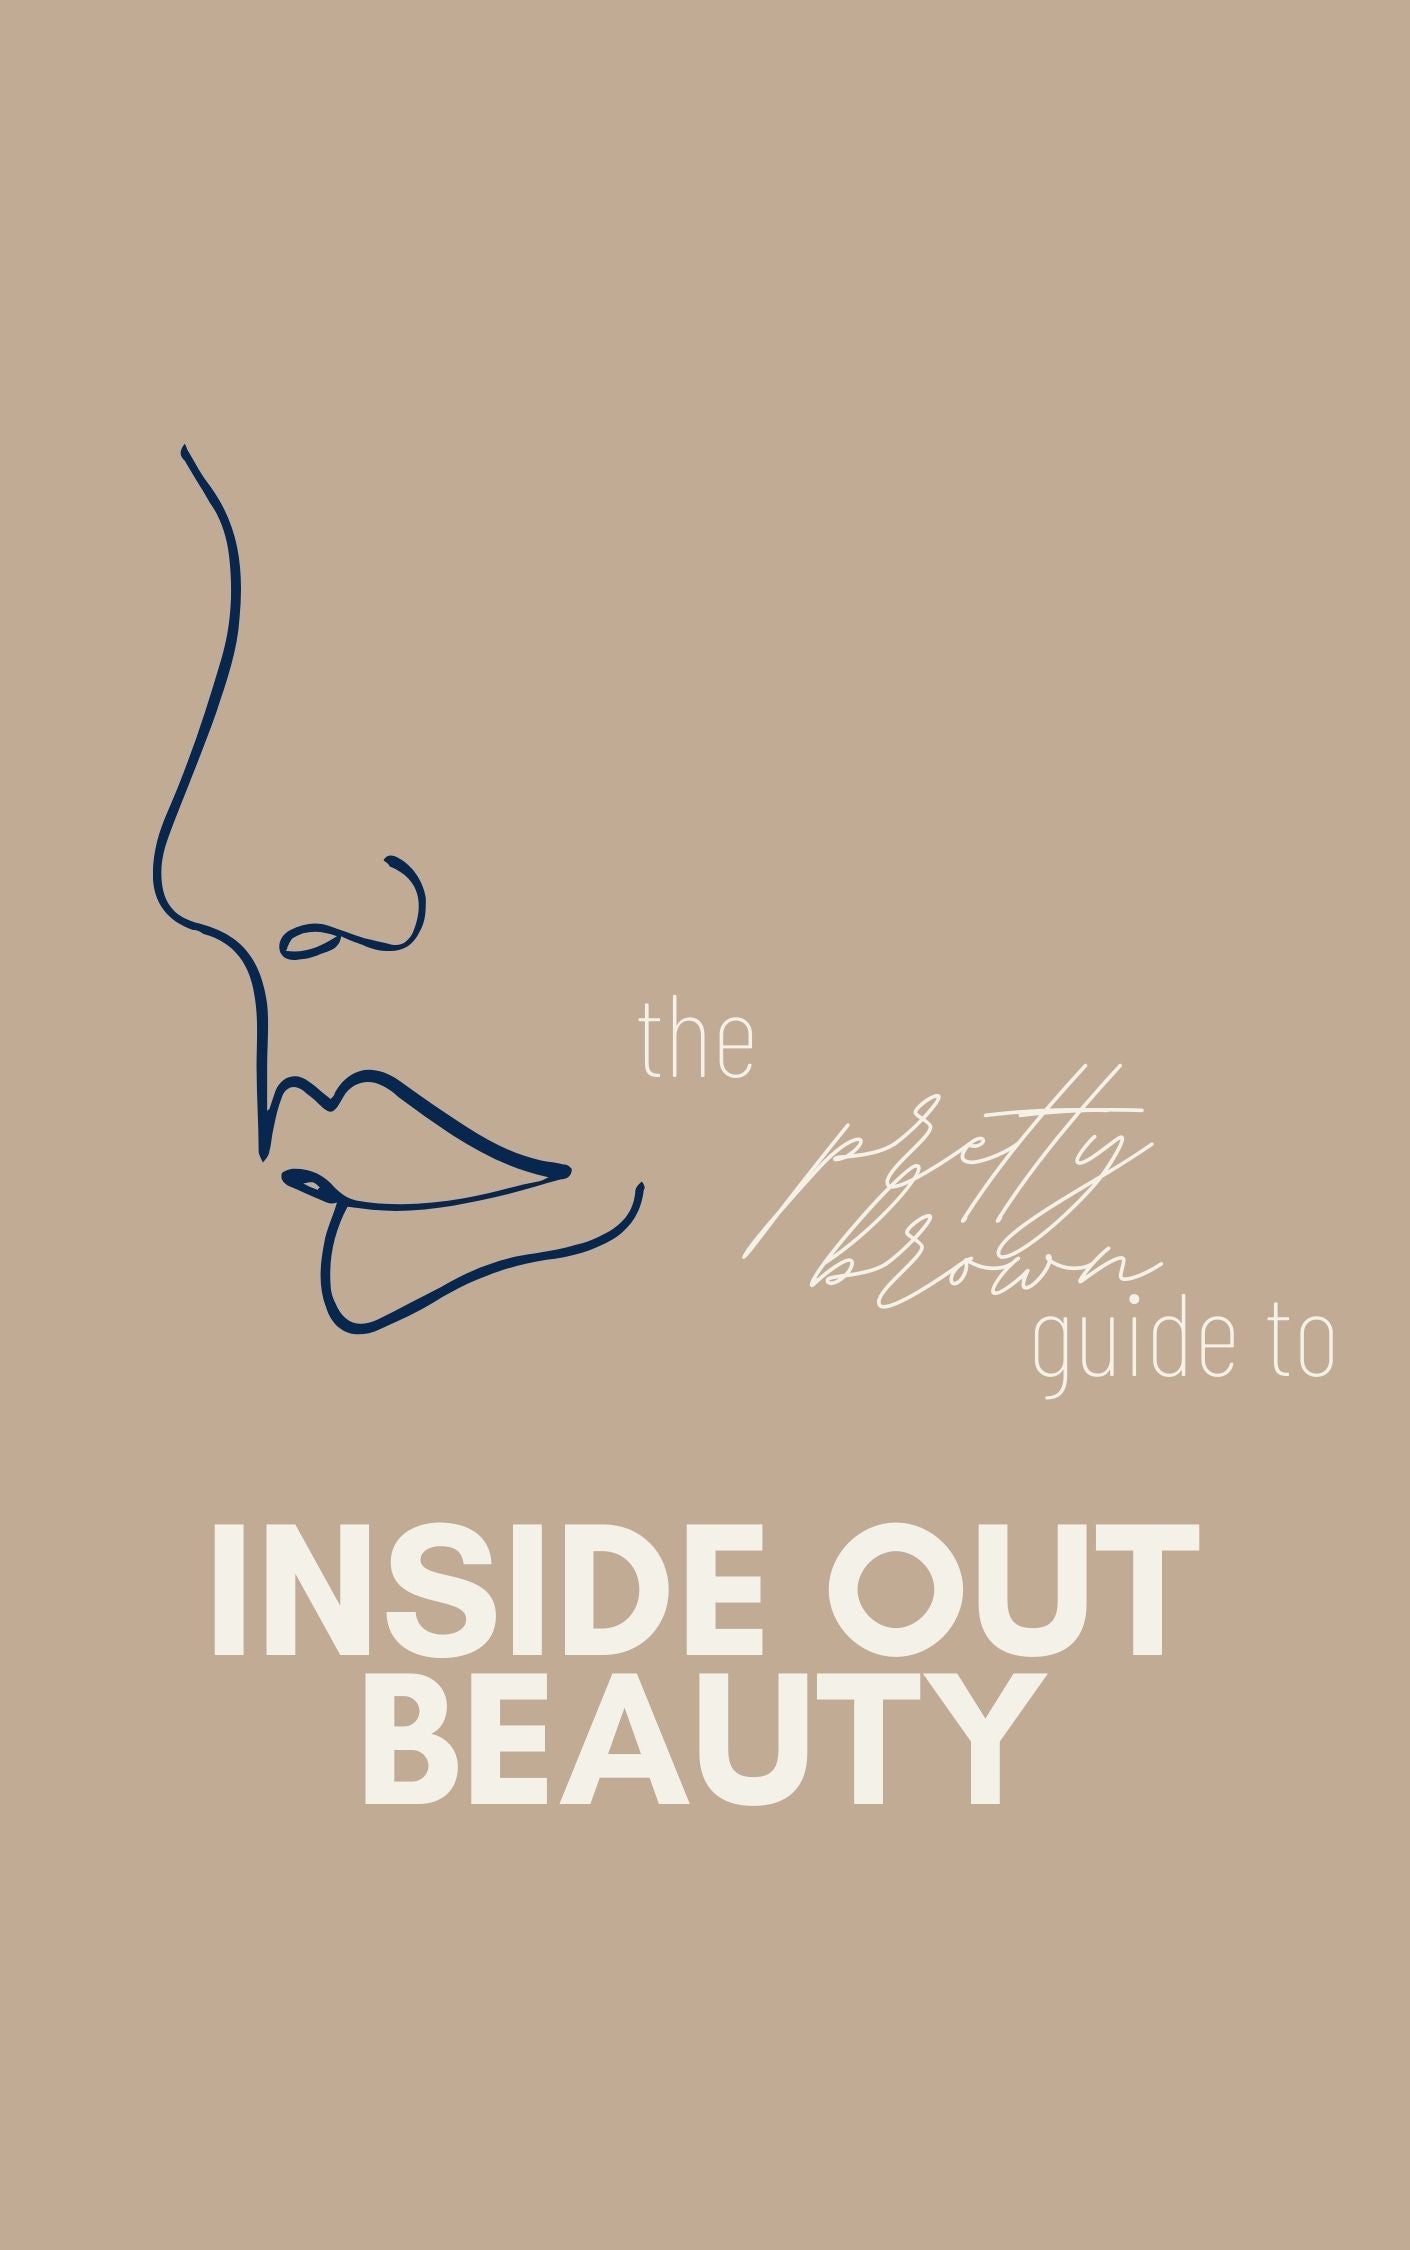 Inside Out Beauty Guide (A Pretty Brown Guide)